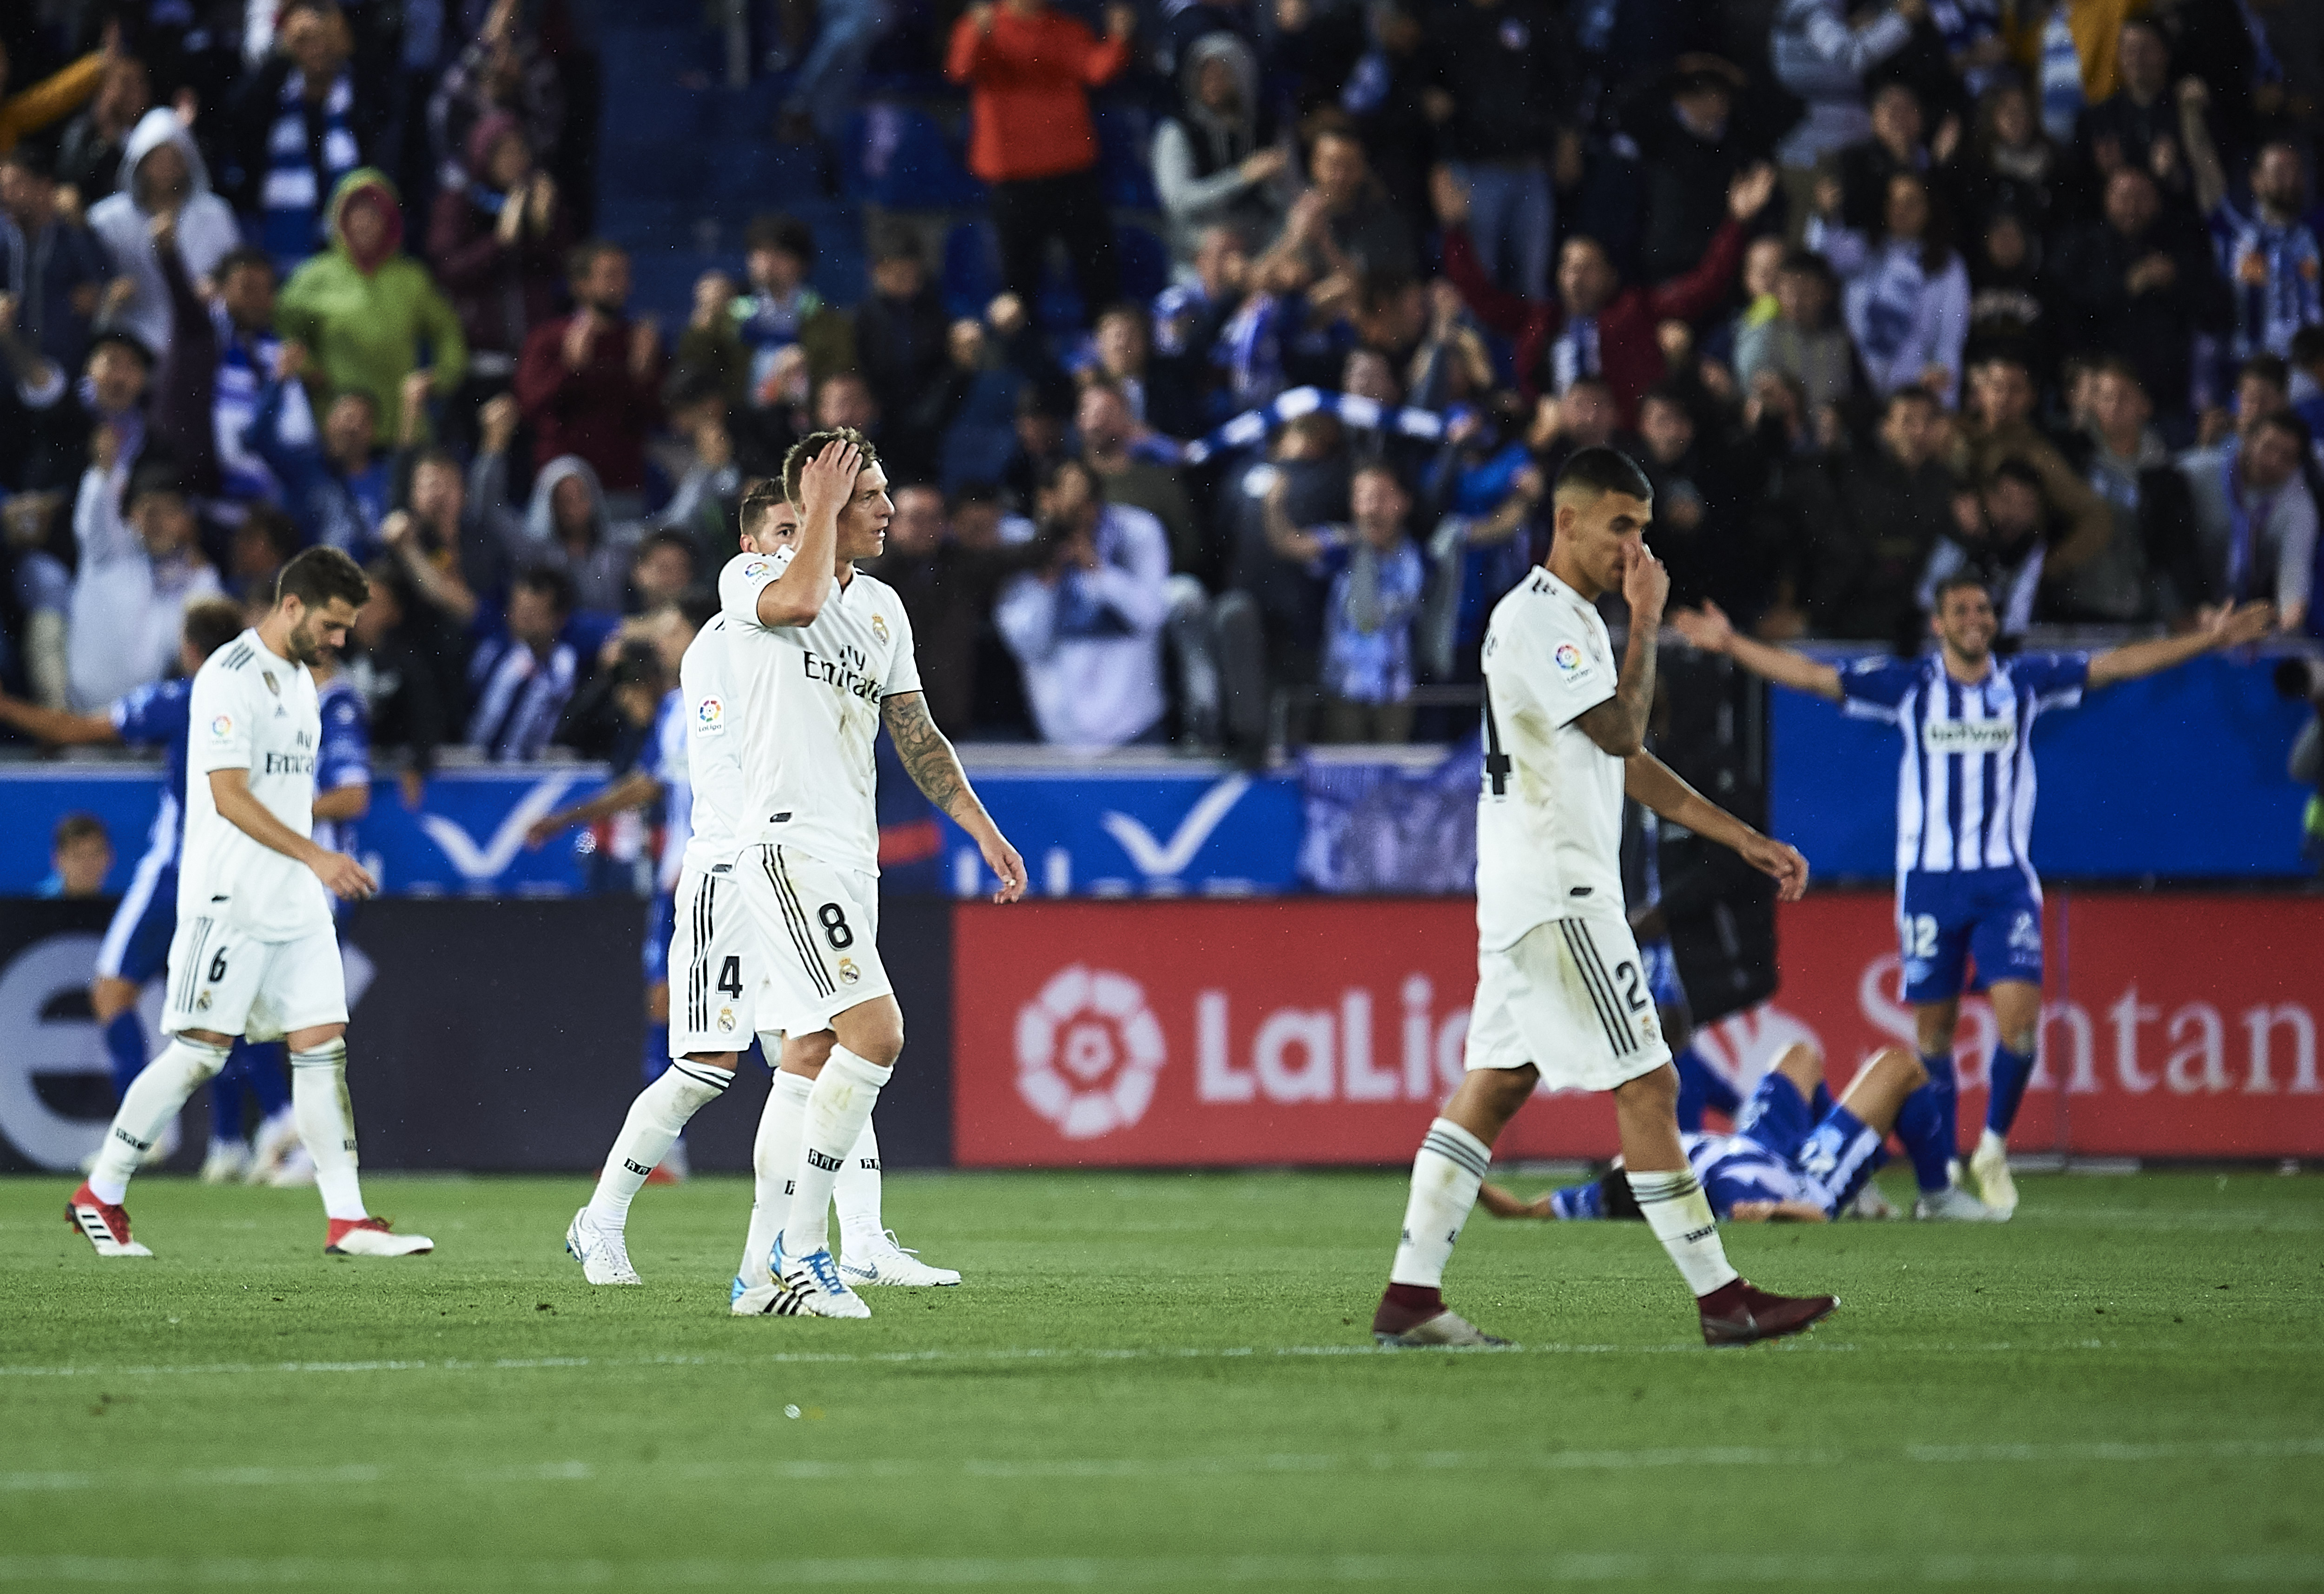 VITORIA-GASTEIZ, SPAIN - OCTOBER 06:  Toni Kroos of Real Madrid CF reacts after loosing against Deportivo Alaves during the La Liga match between Deportivo Alaves and Real Madrid CF at Estadio de Mendizorroza on October 6, 2018 in Vitoria-Gasteiz, Spain.  (Photo by Juan Manuel Serrano Arce/Getty Images)